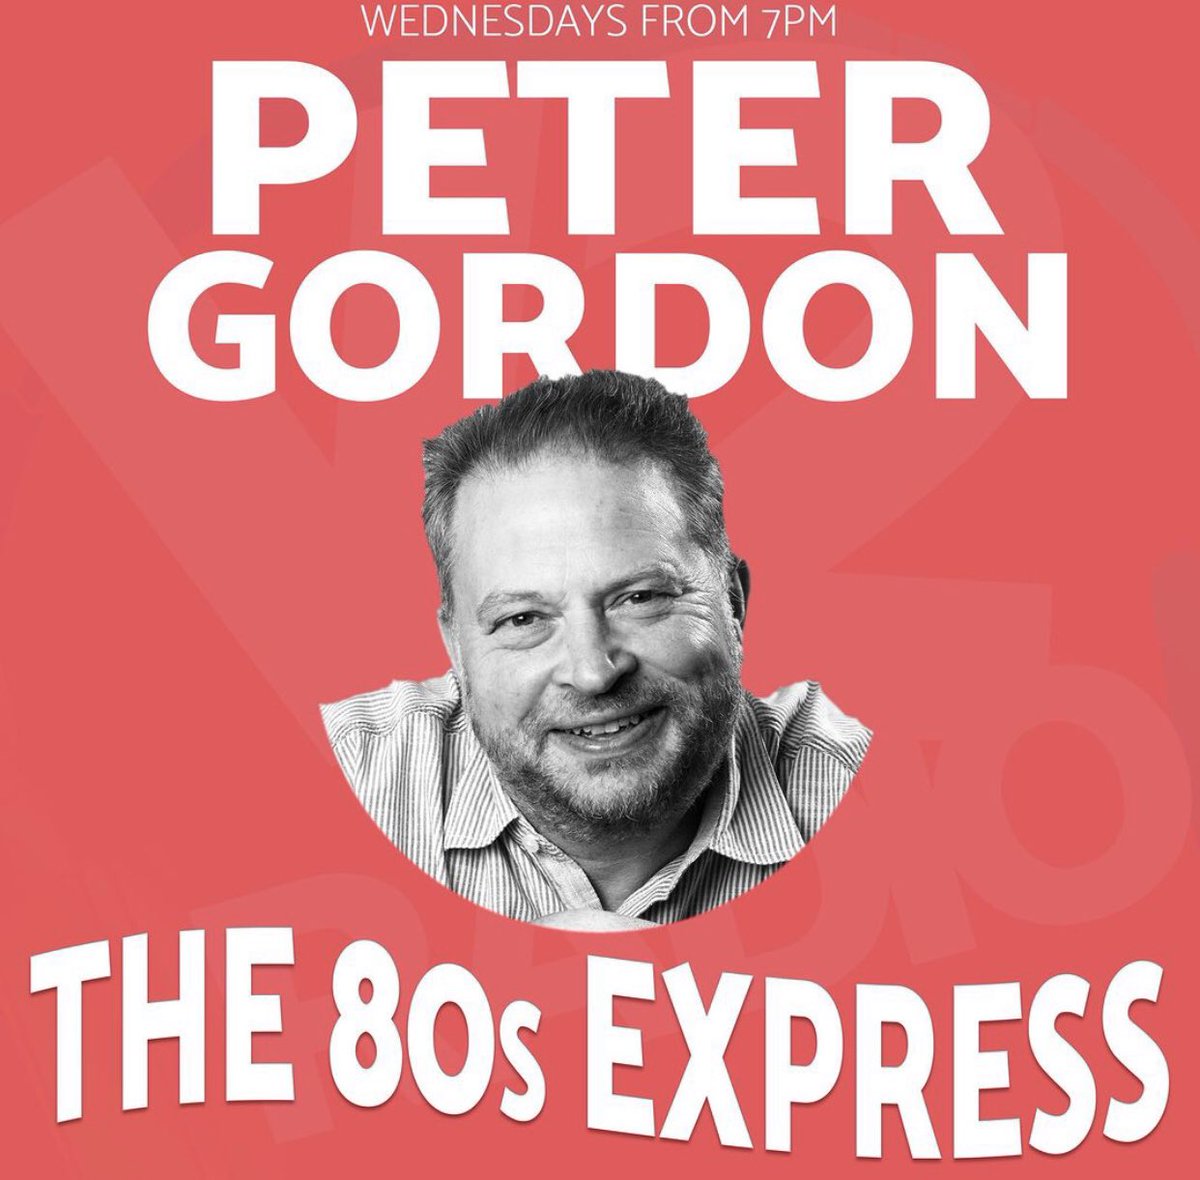 Back on the radio tonight with #80sExpress on @V2RadioSussex 🎙🎶 Featuring #FunBoyThree as our ‘80s Alumni’. Join me from 7pm… v2radio.co.uk/on-air/how-to-…